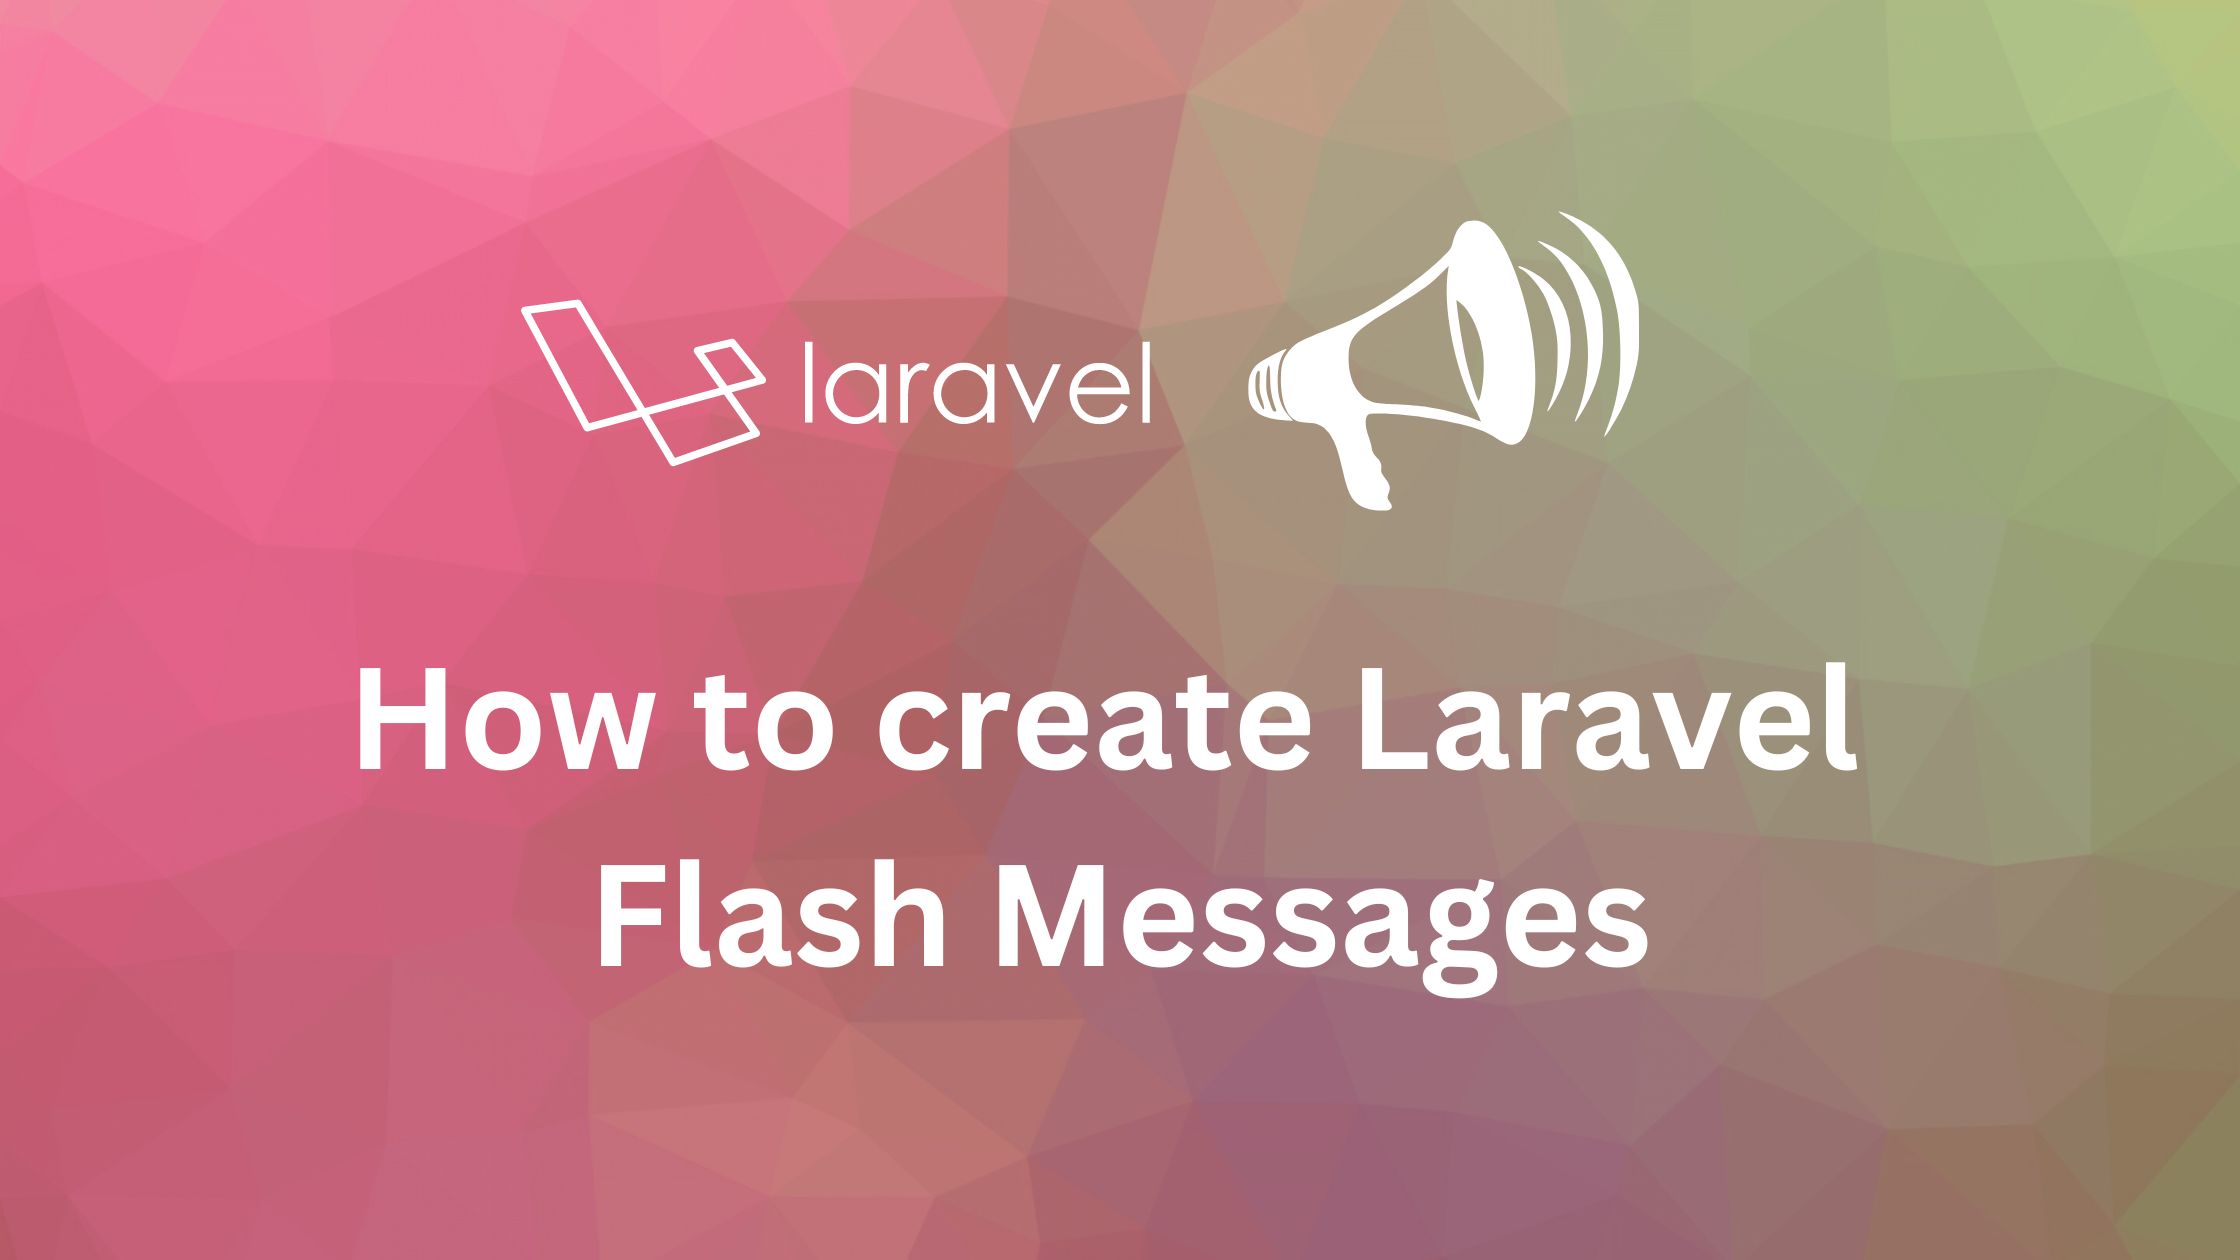 How to create Laravel Flash Messages